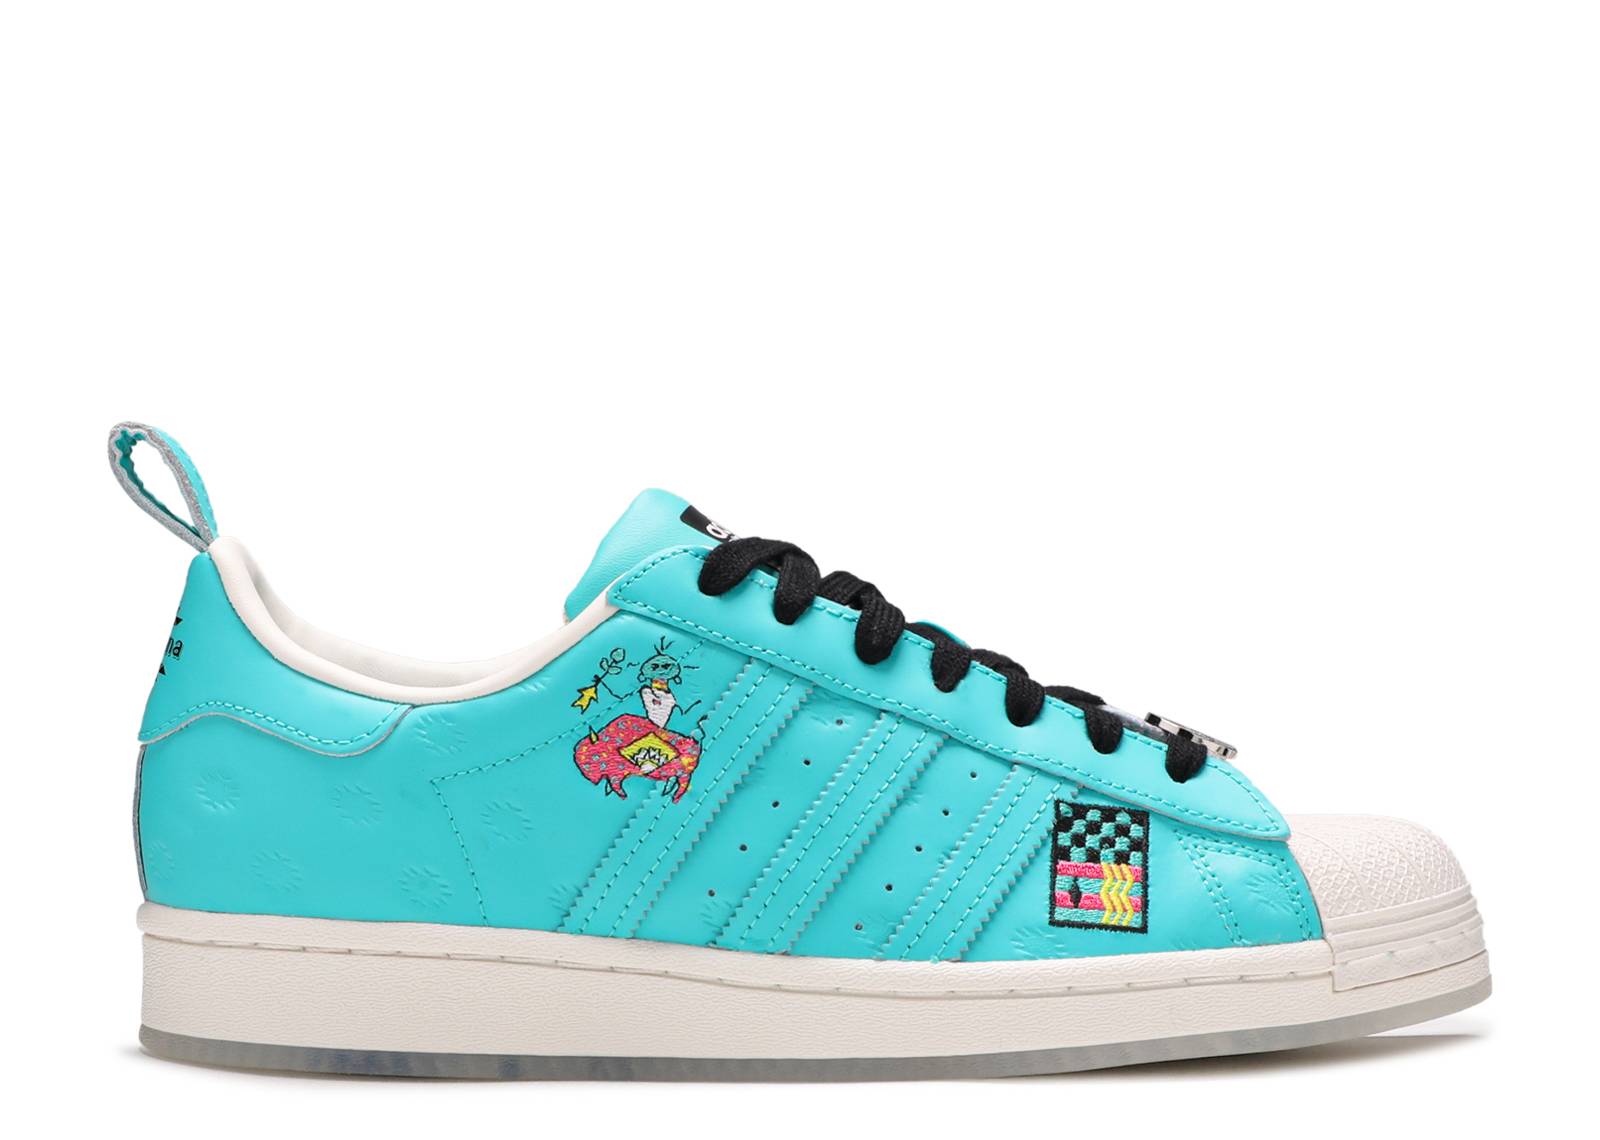 Arizona x Superstar 'Have an Iced Day - Teal White'